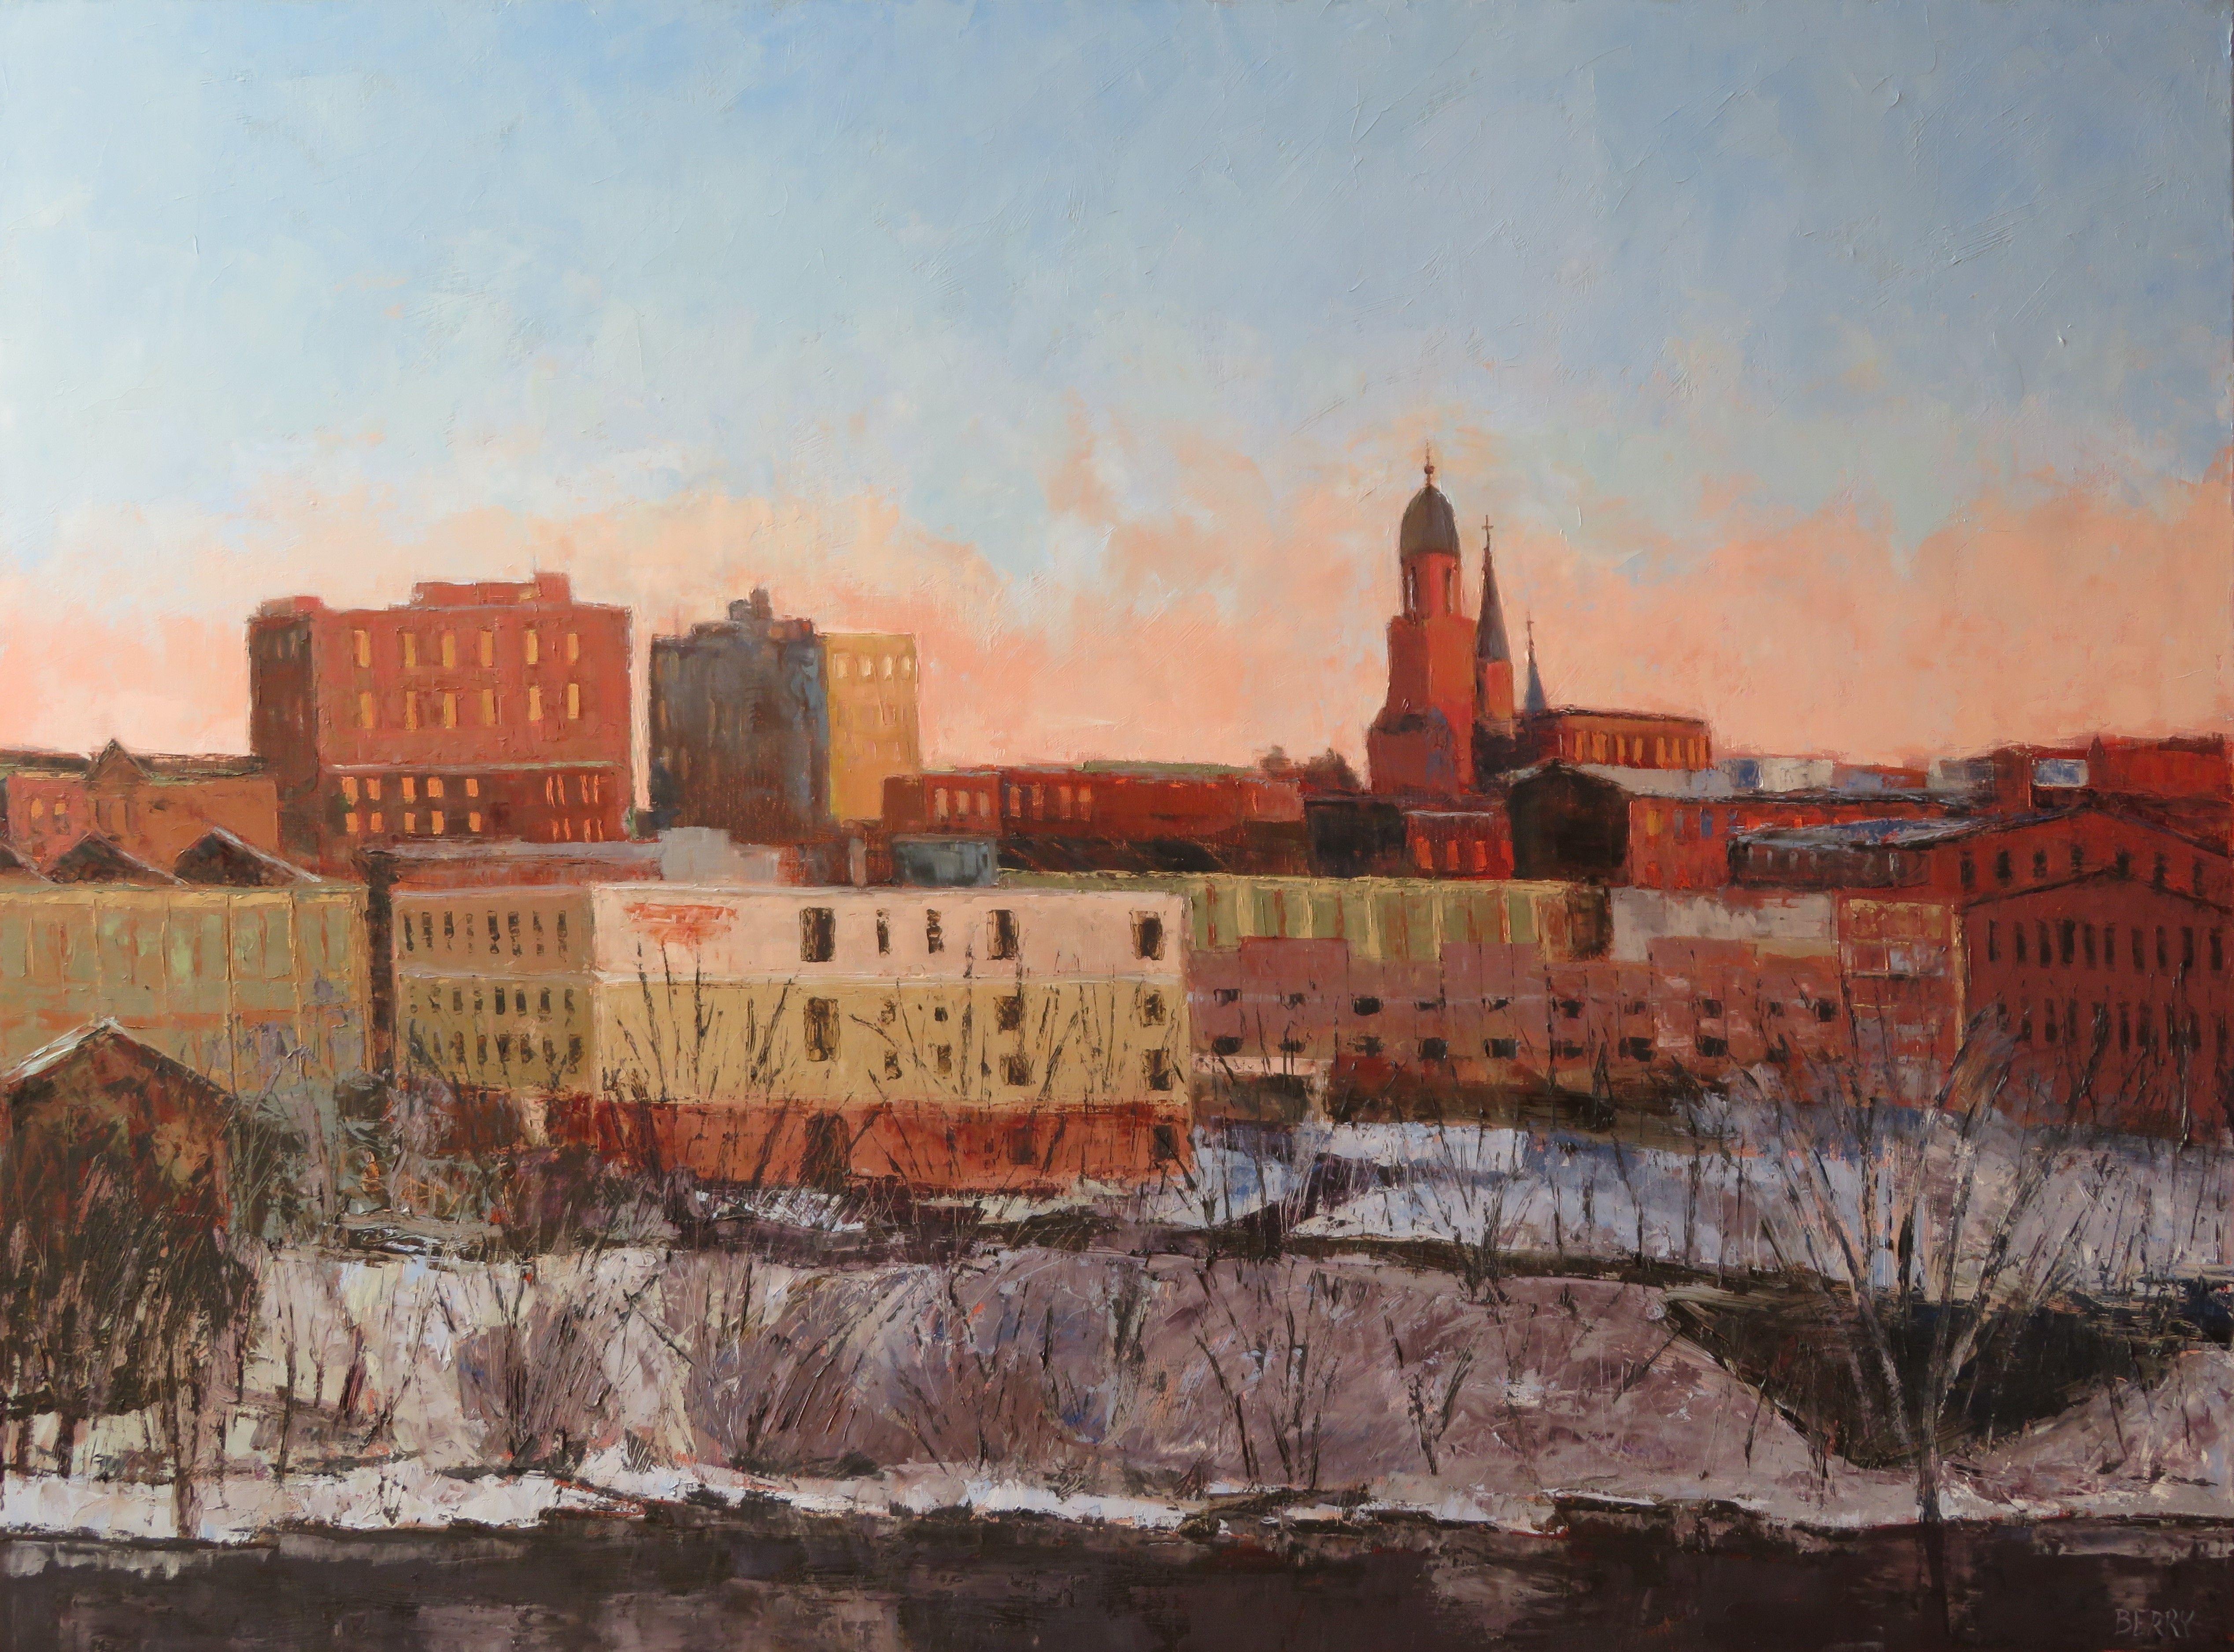 The Maine city of Lewiston has a skyline of new and old buildings, most of which are brick.  The setting sun seems to highlight the brick and gives it all a glow.  This was done with oil paints and cold wax on linen and is ready to hang.   ::